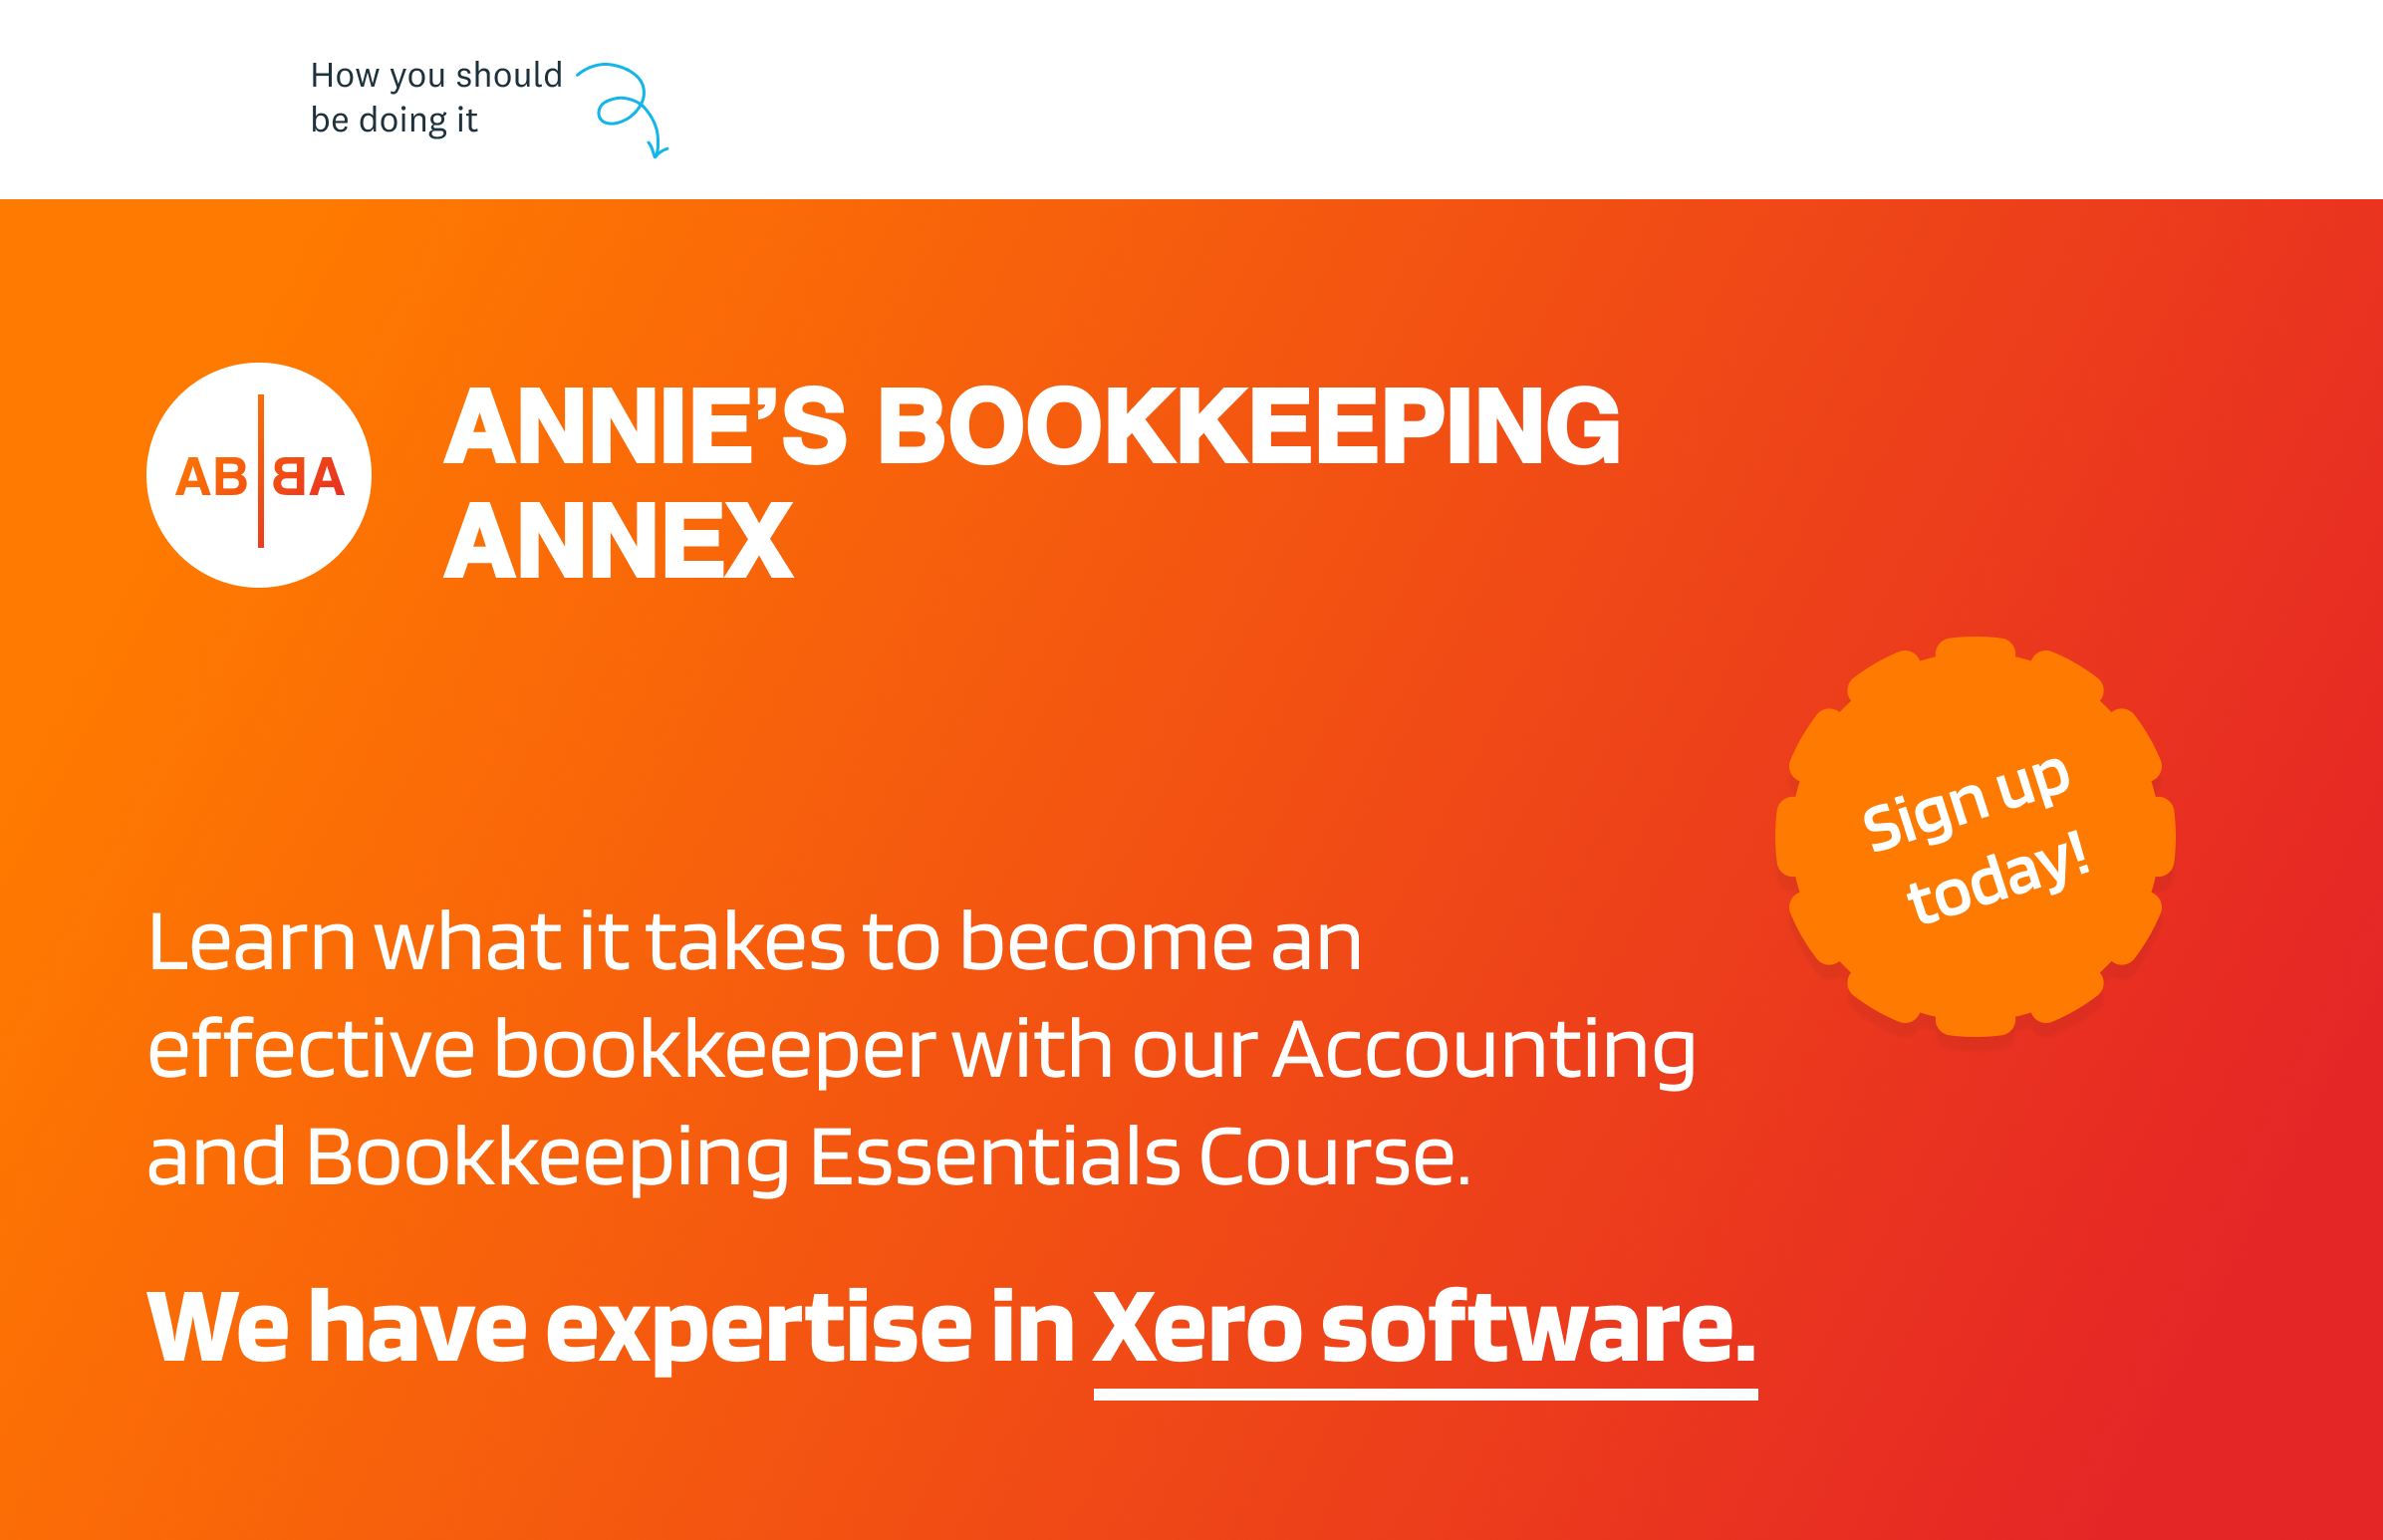 An example of correct use of Xero branding, Annie’s Bookkeeping Annex advertises ‘expertise in Xero software’.